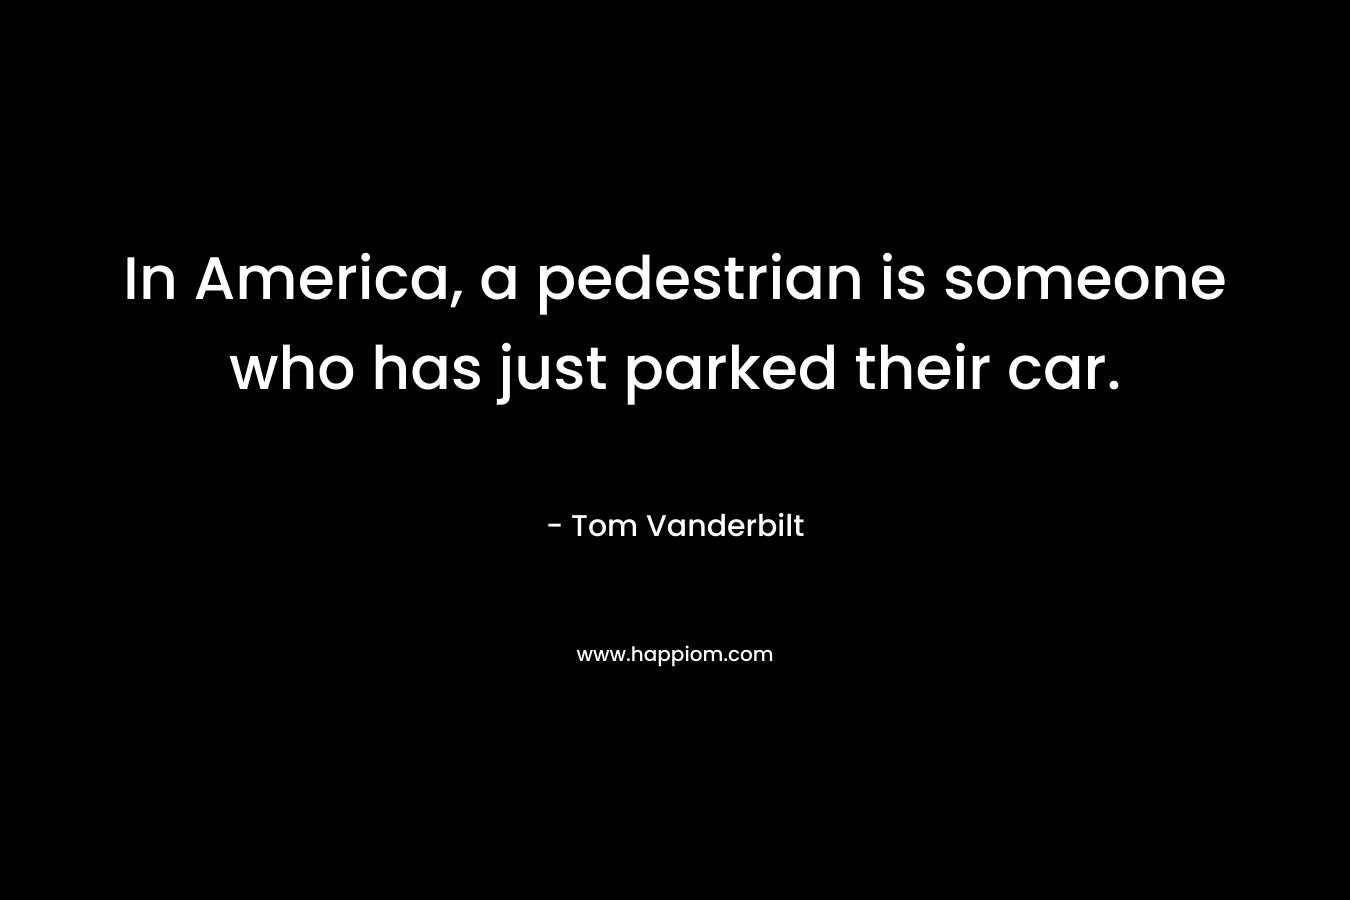 In America, a pedestrian is someone who has just parked their car.